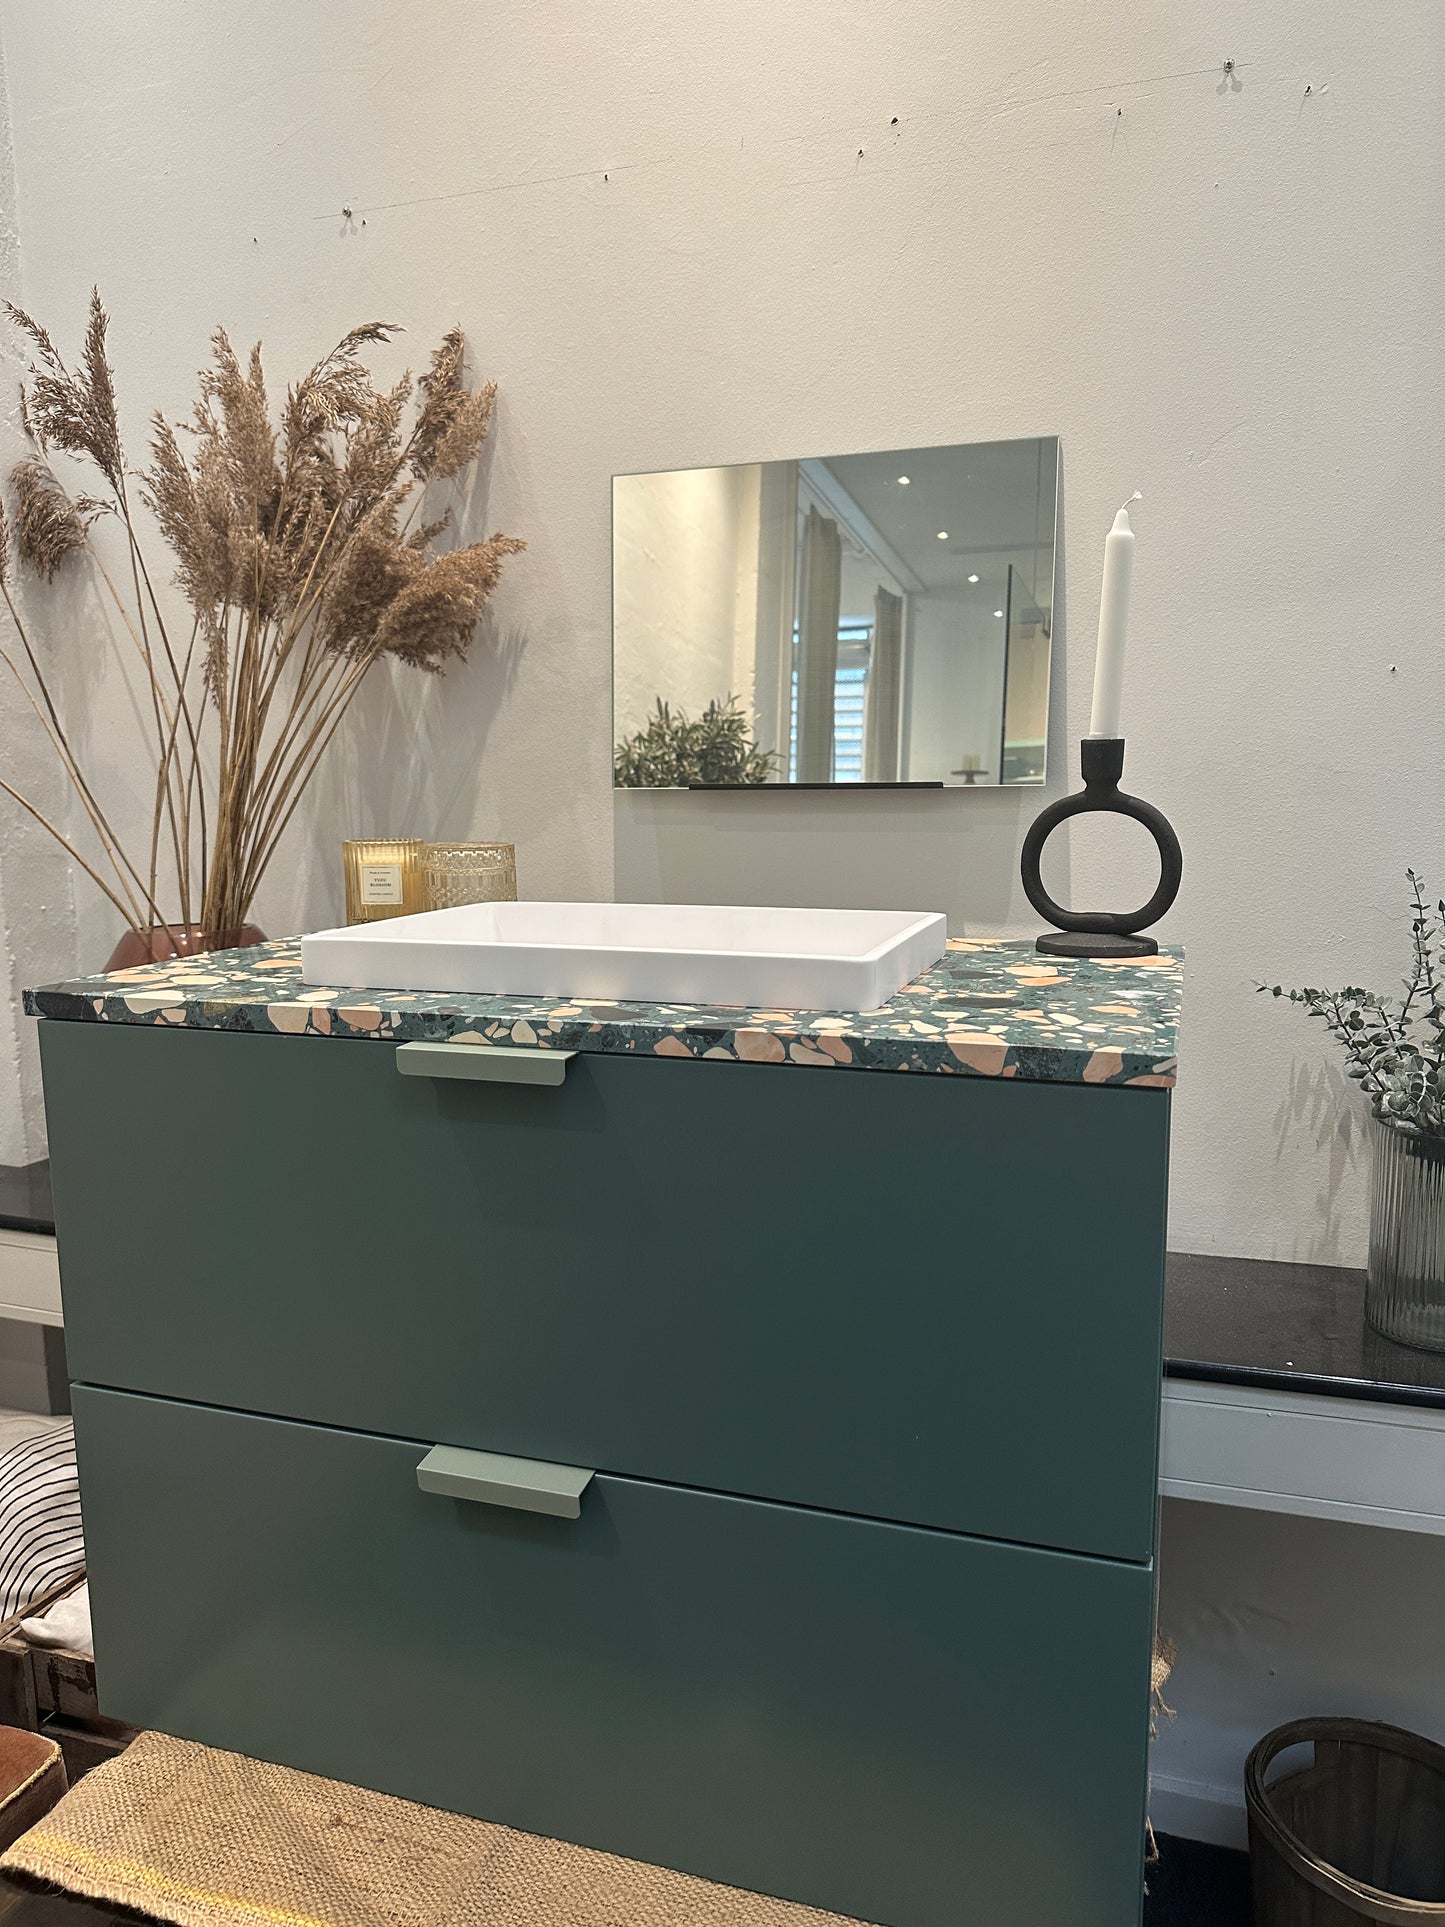 OUTLET H2 80cm, toniton green, terrazzo og solid surface